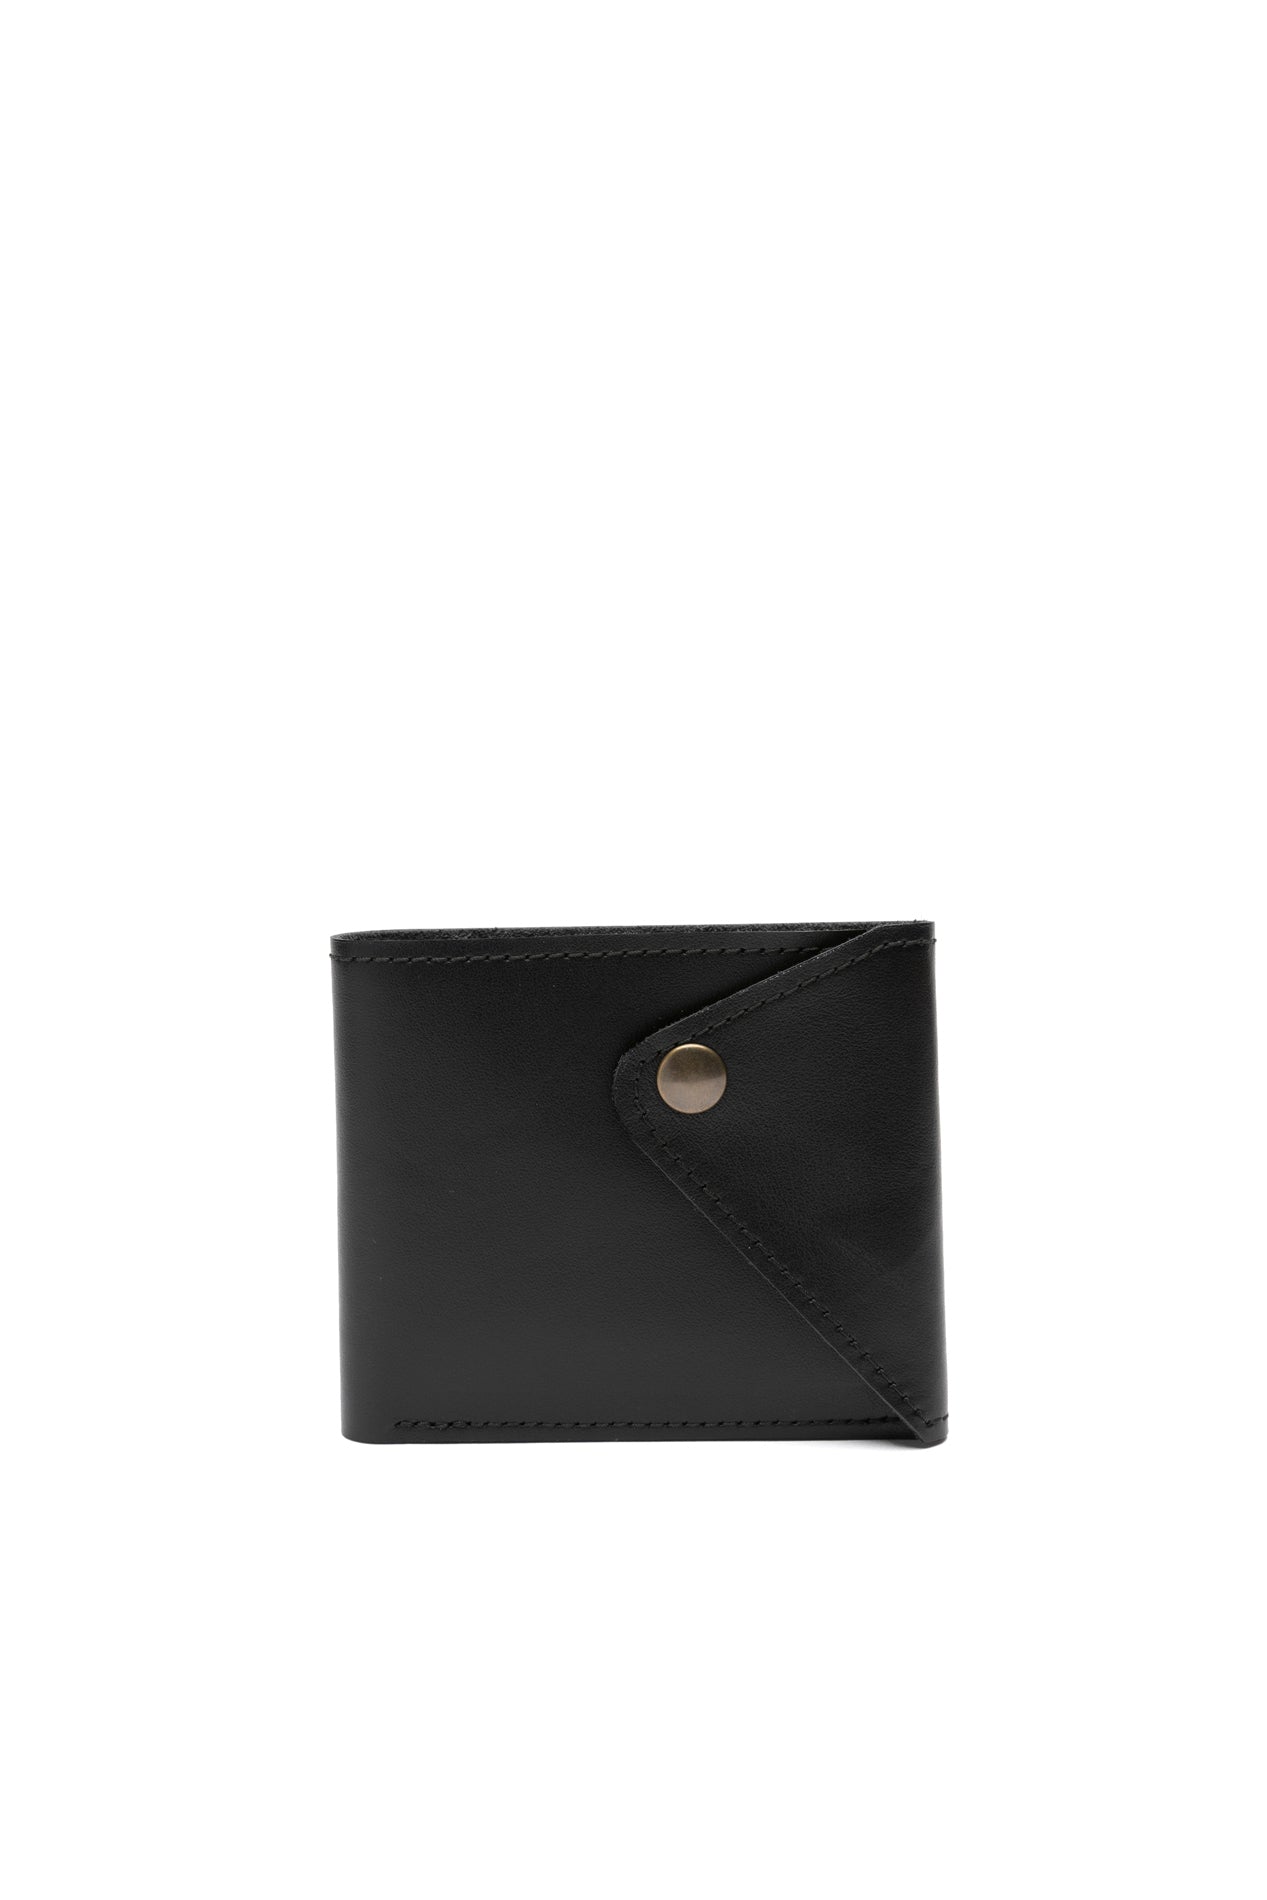 AMERICAN WALLET WITH BROHE | Black